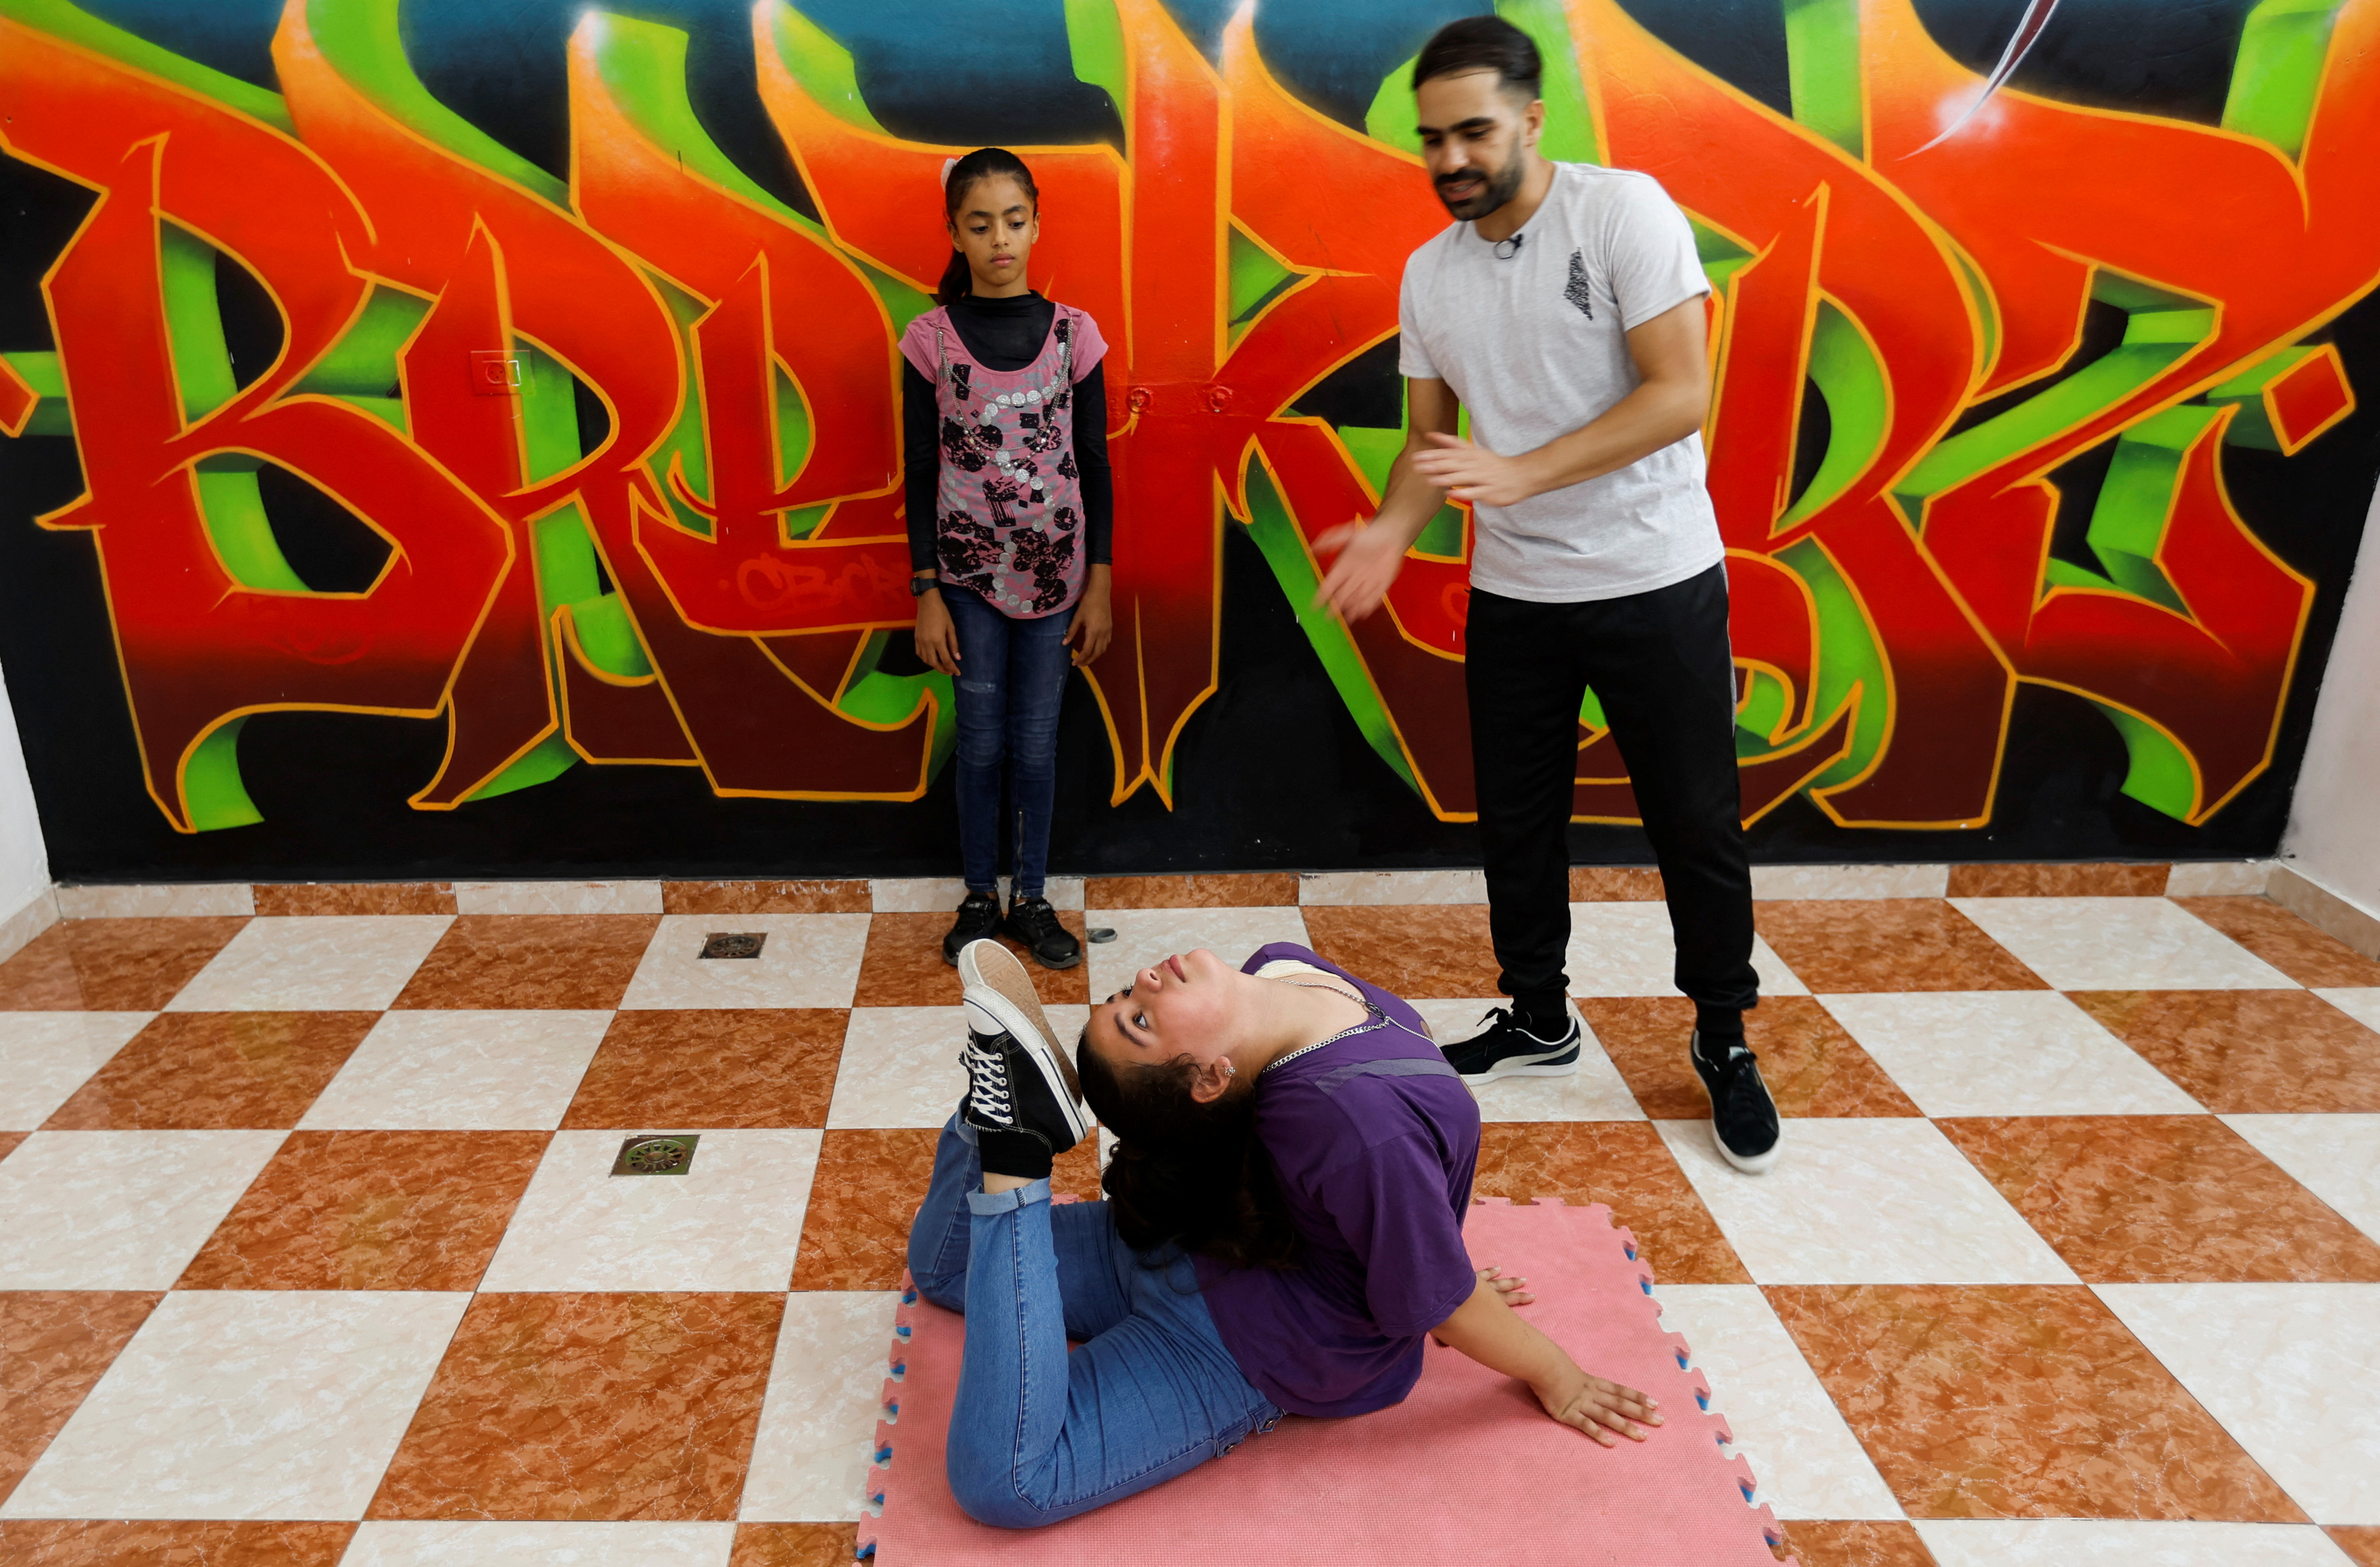 Gaza children breakdance as a form of expression to help overcome stress